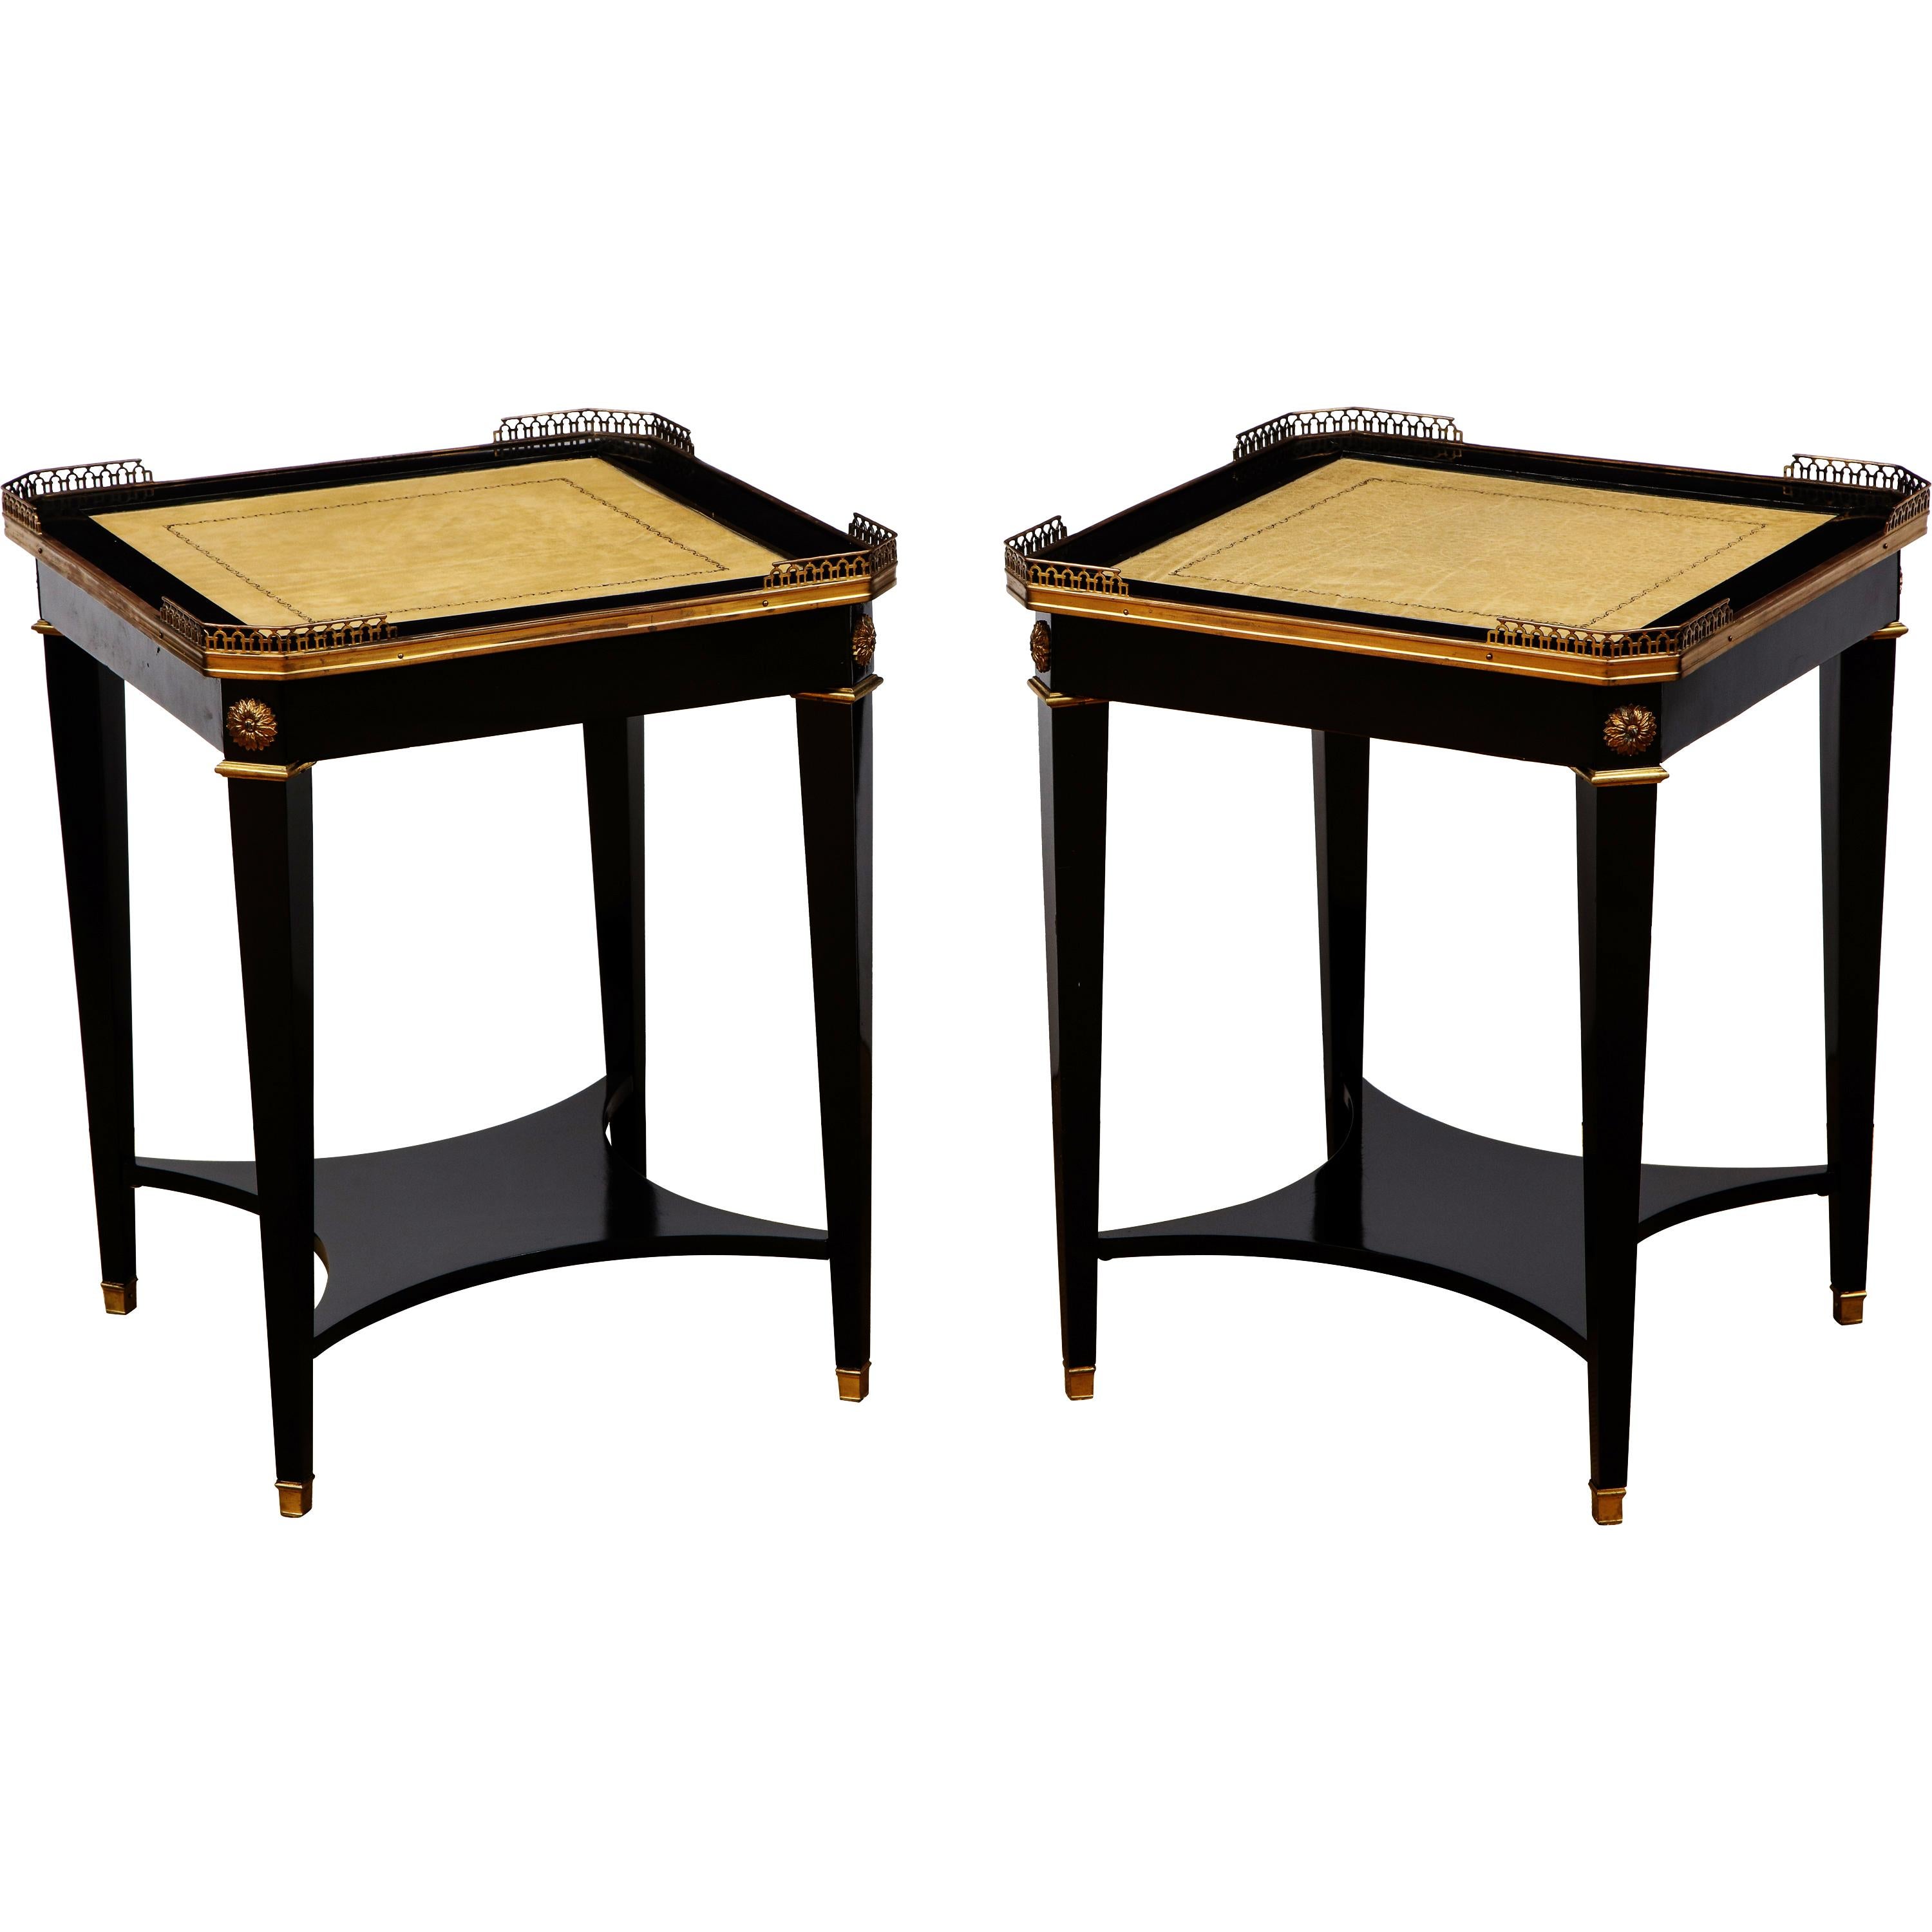 Pair of Leather Topped Side Tables by Maison Jansen